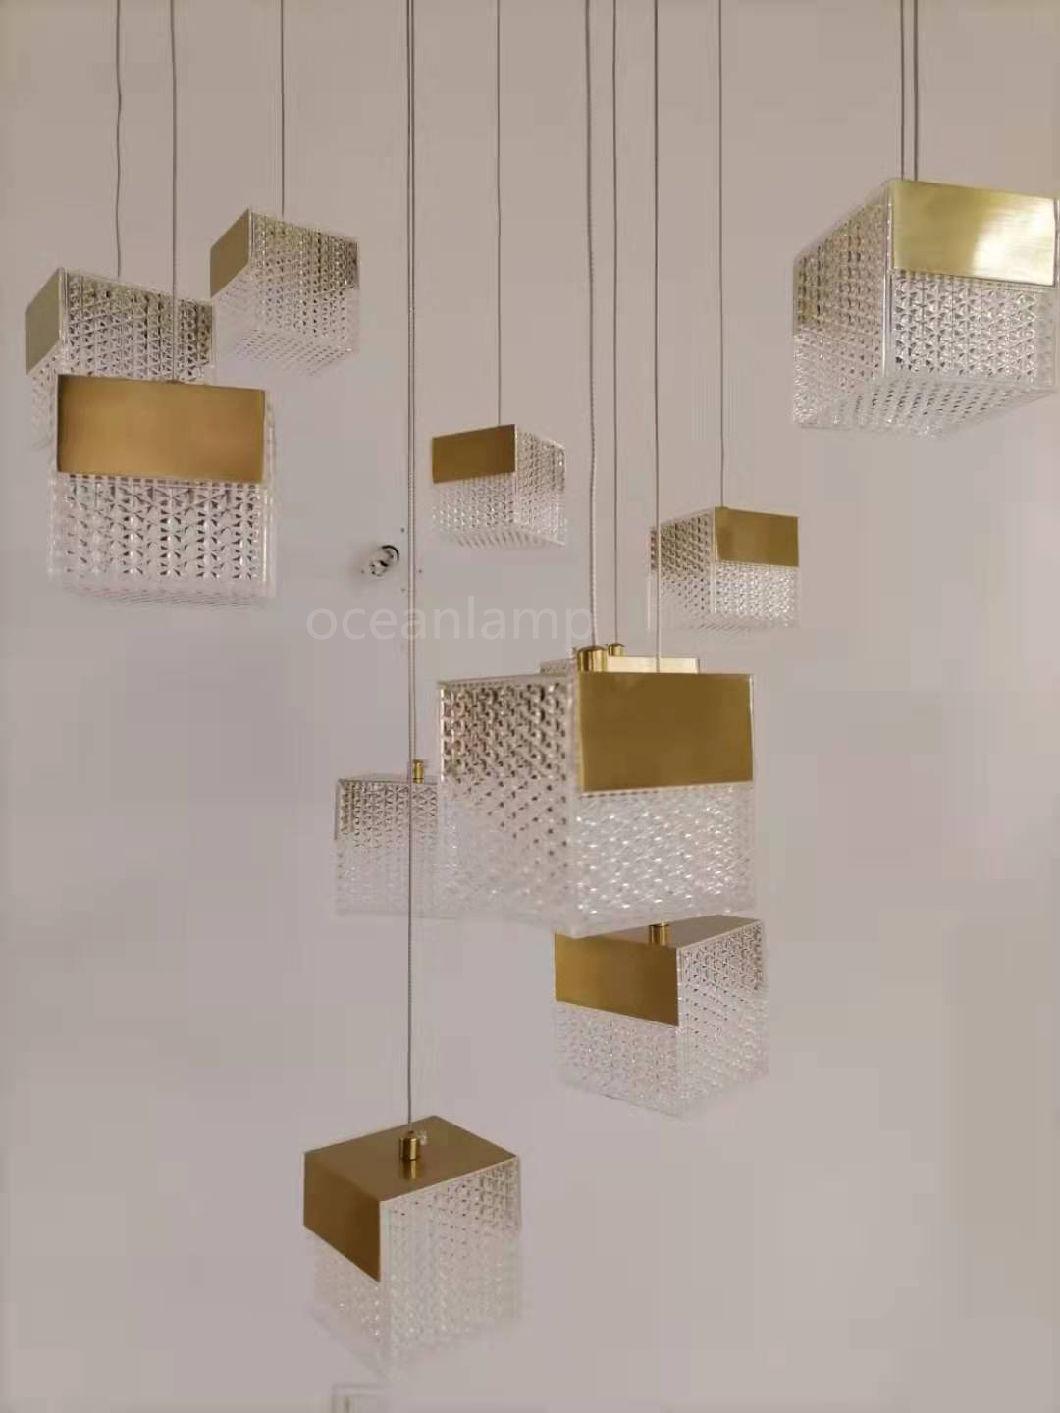 2021 New Cubic Pendant Lighting in Gold Color Omd821600